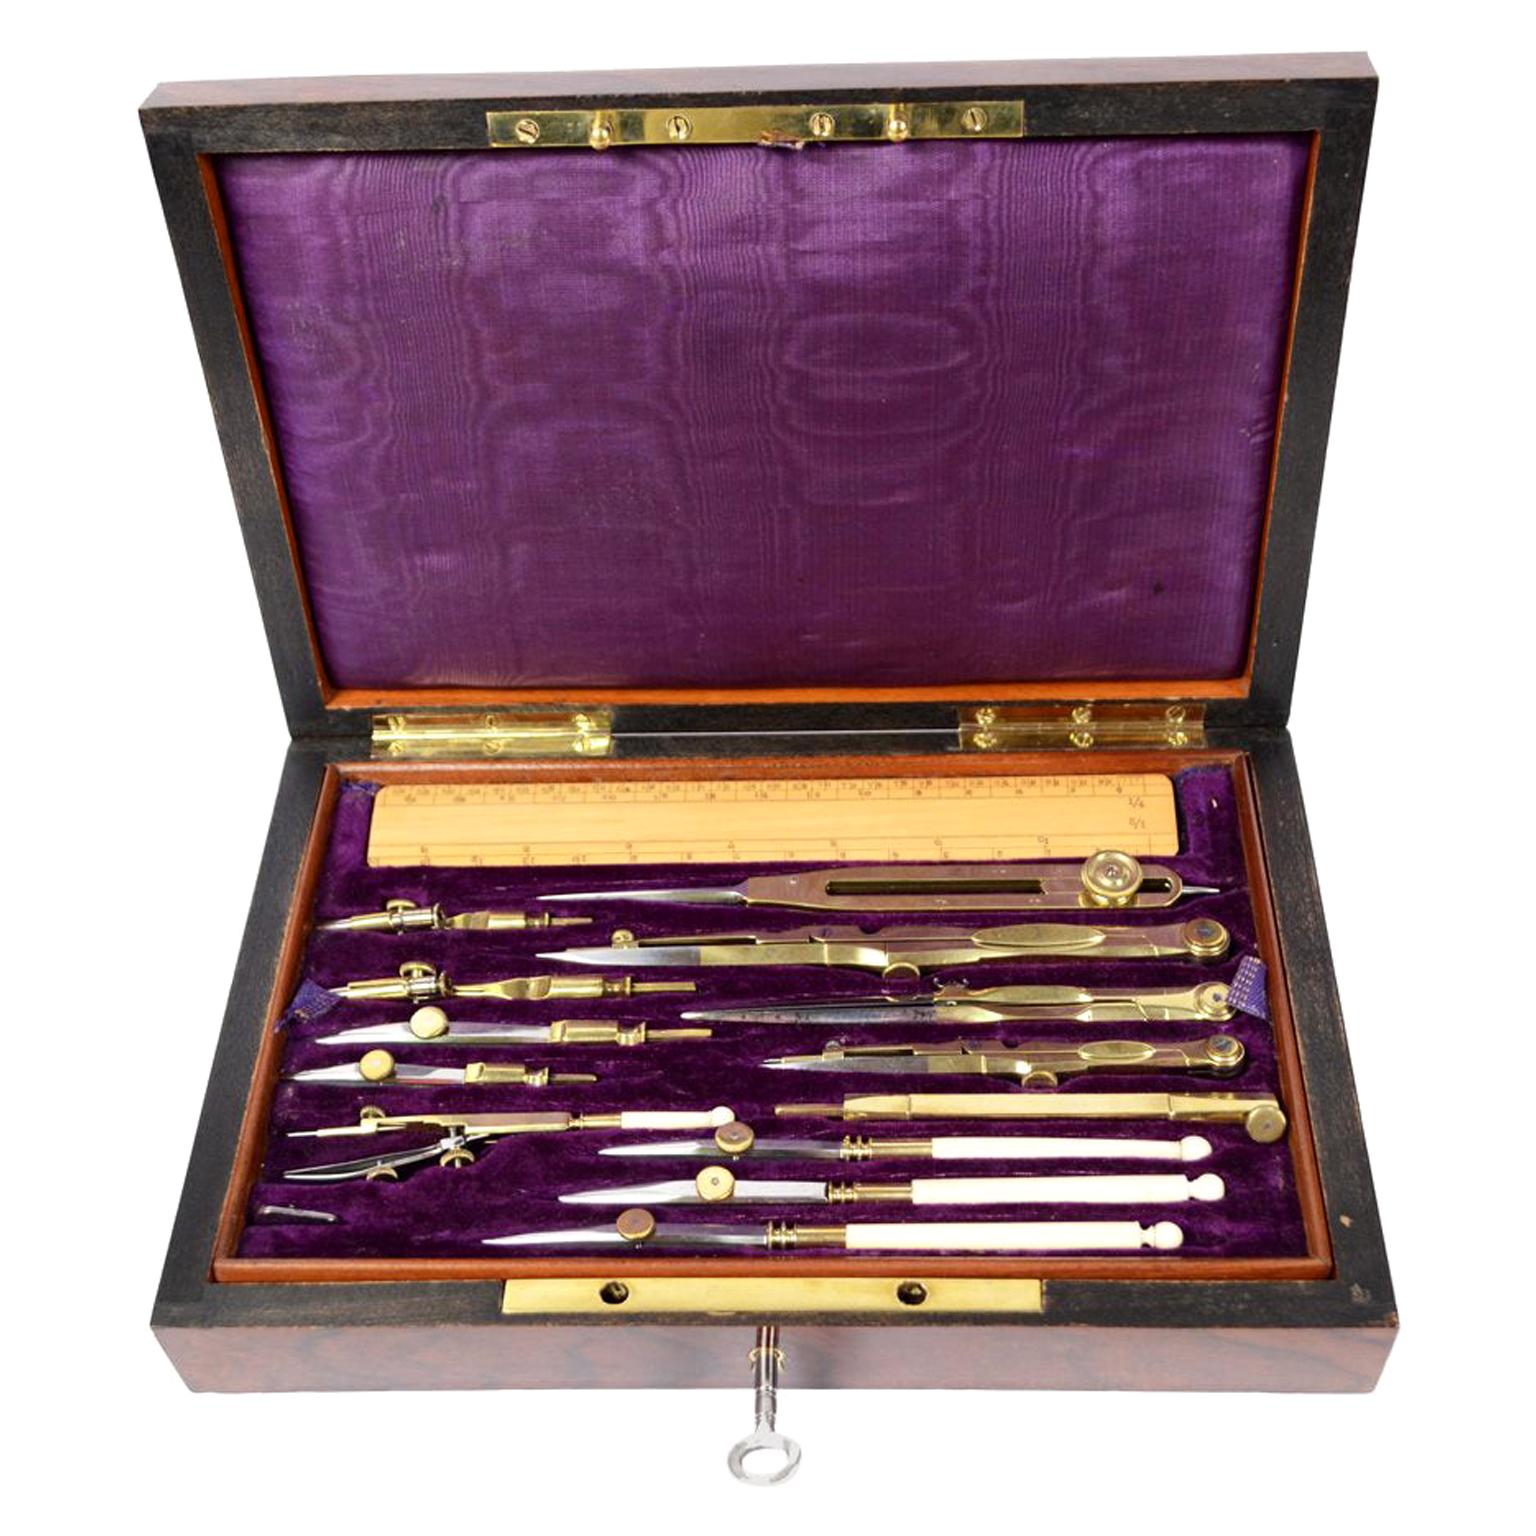 1850 Vintage Drawing Instruments Set sold by Papeterie Henri Eloy in Peronne 